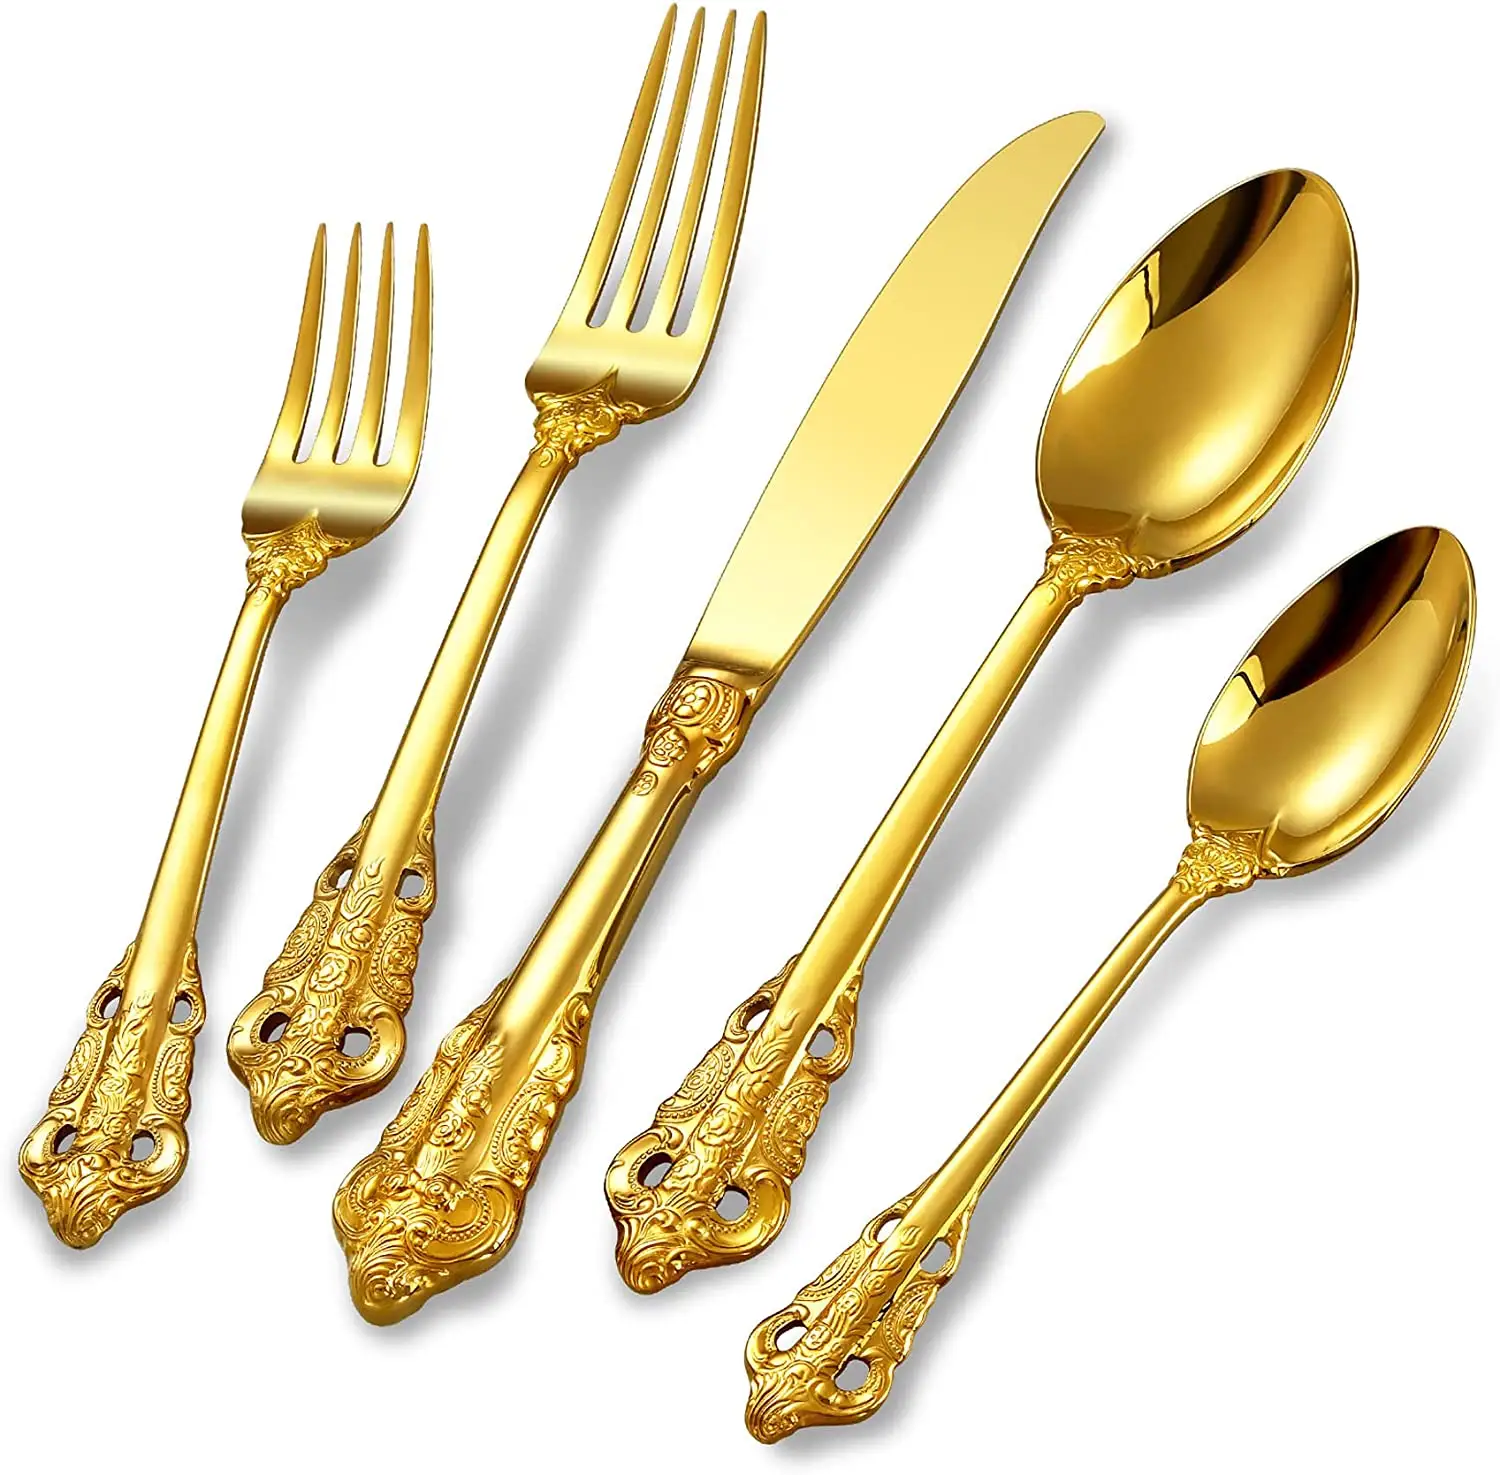 18/10 Palace Style Silverware 304 Stainless Steel Gold Plating Flatware Spoon Fork Knife sets Wedding Cutlery sets